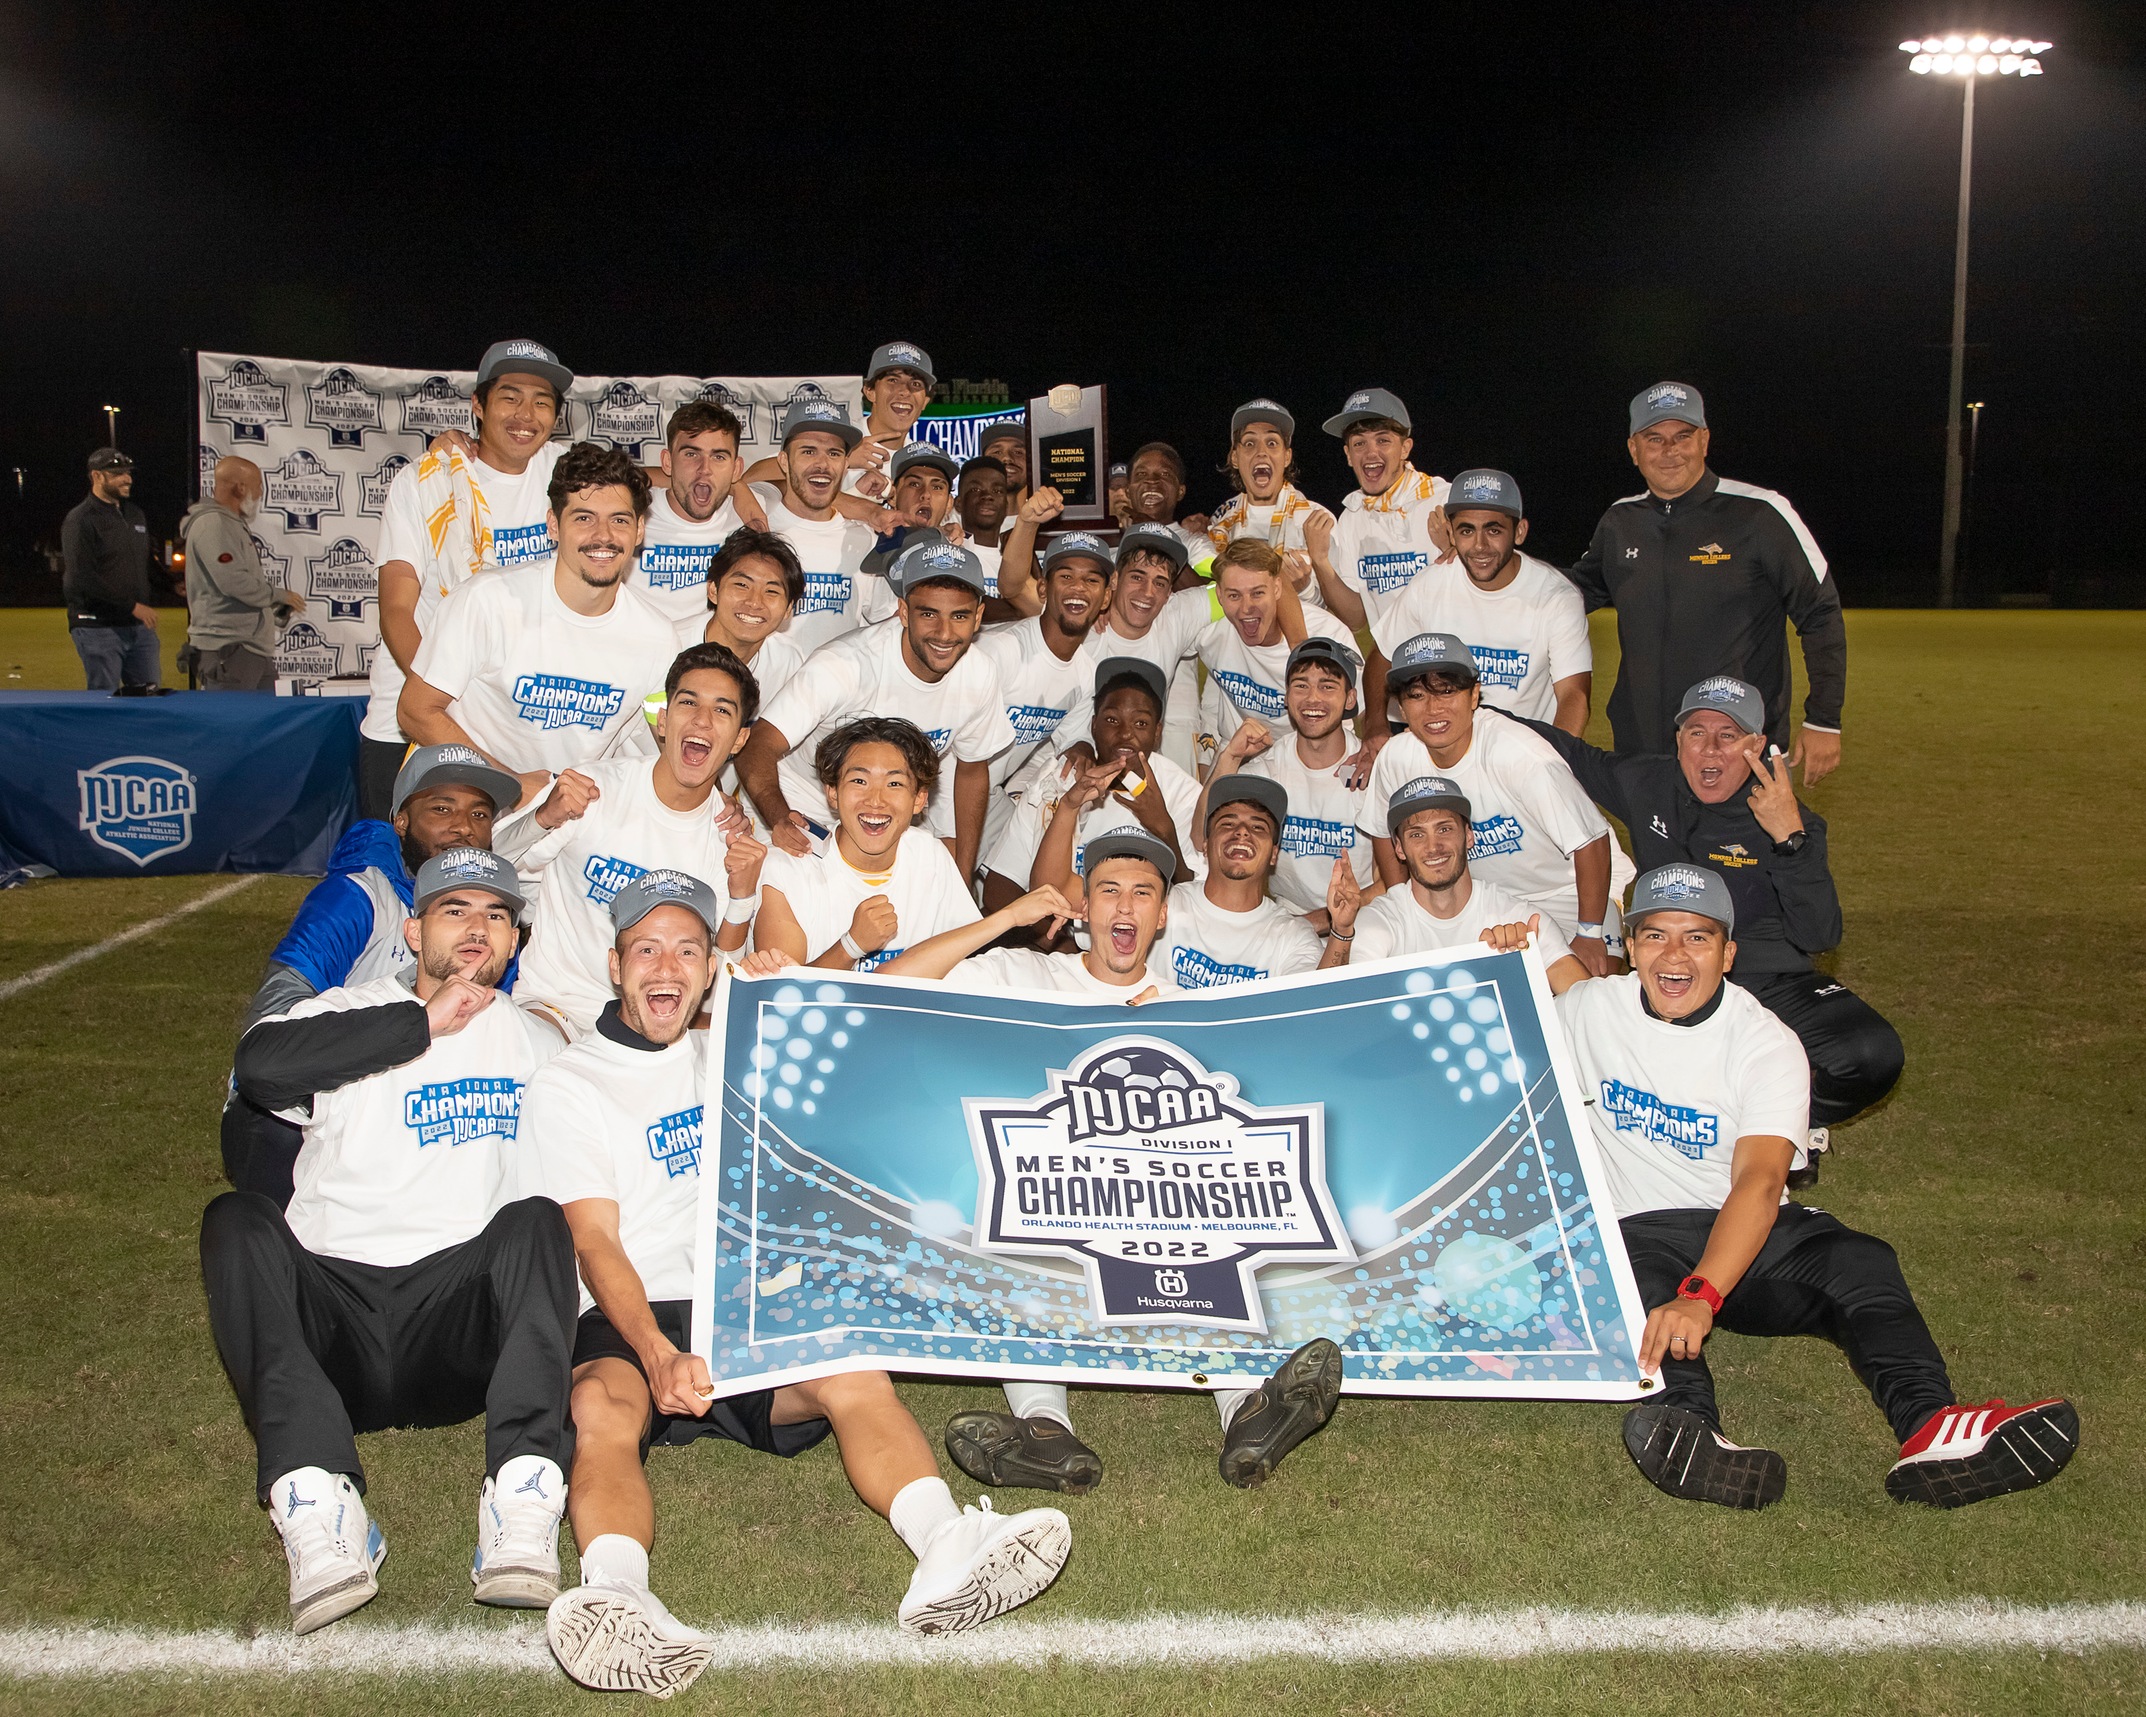 Monroe College wins NJCAA Division I National Championship